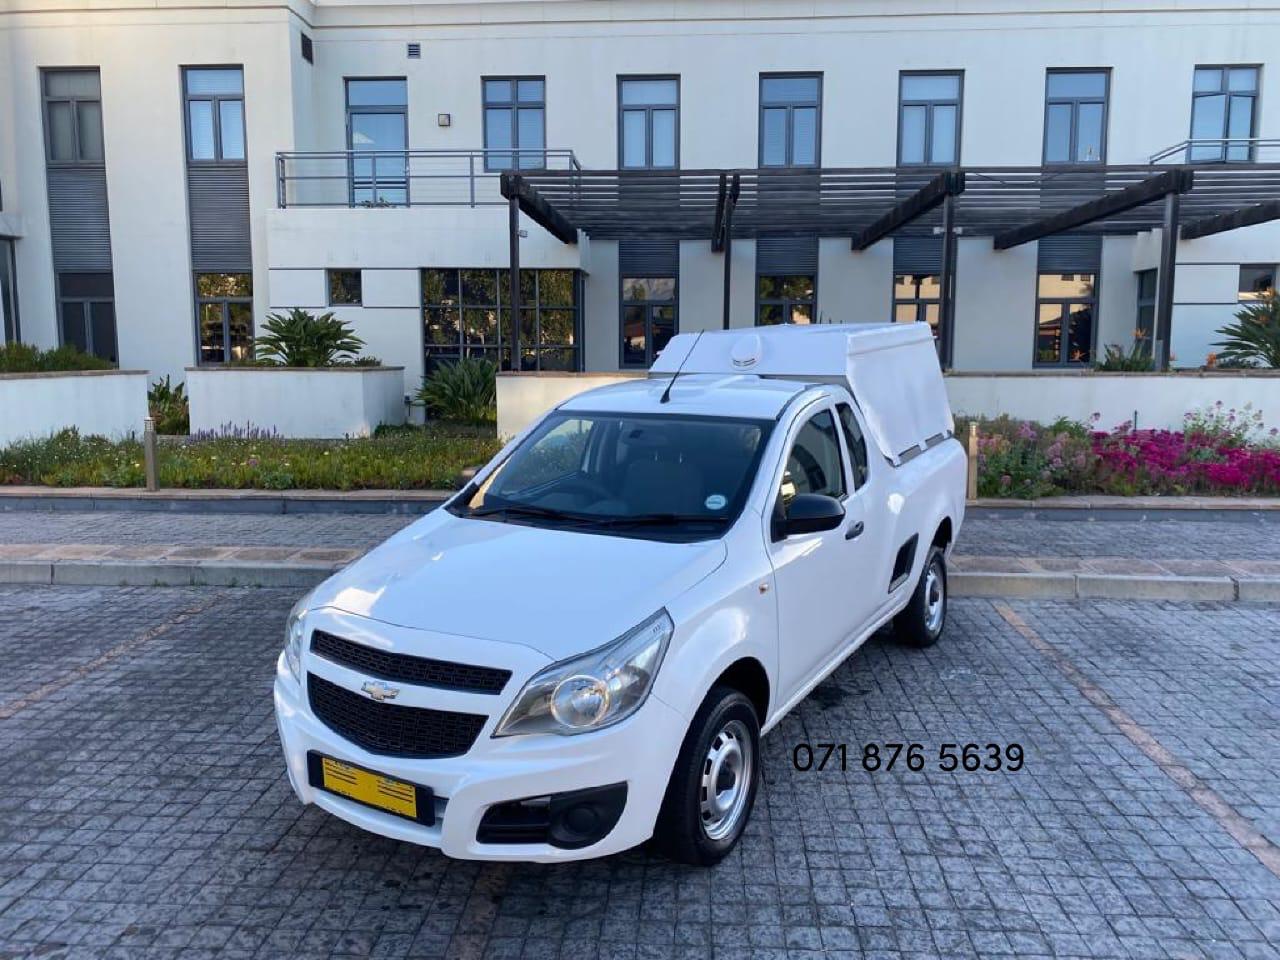 2014 Chevrolet Utility 1.4 (Aircon+ABS) For Sale